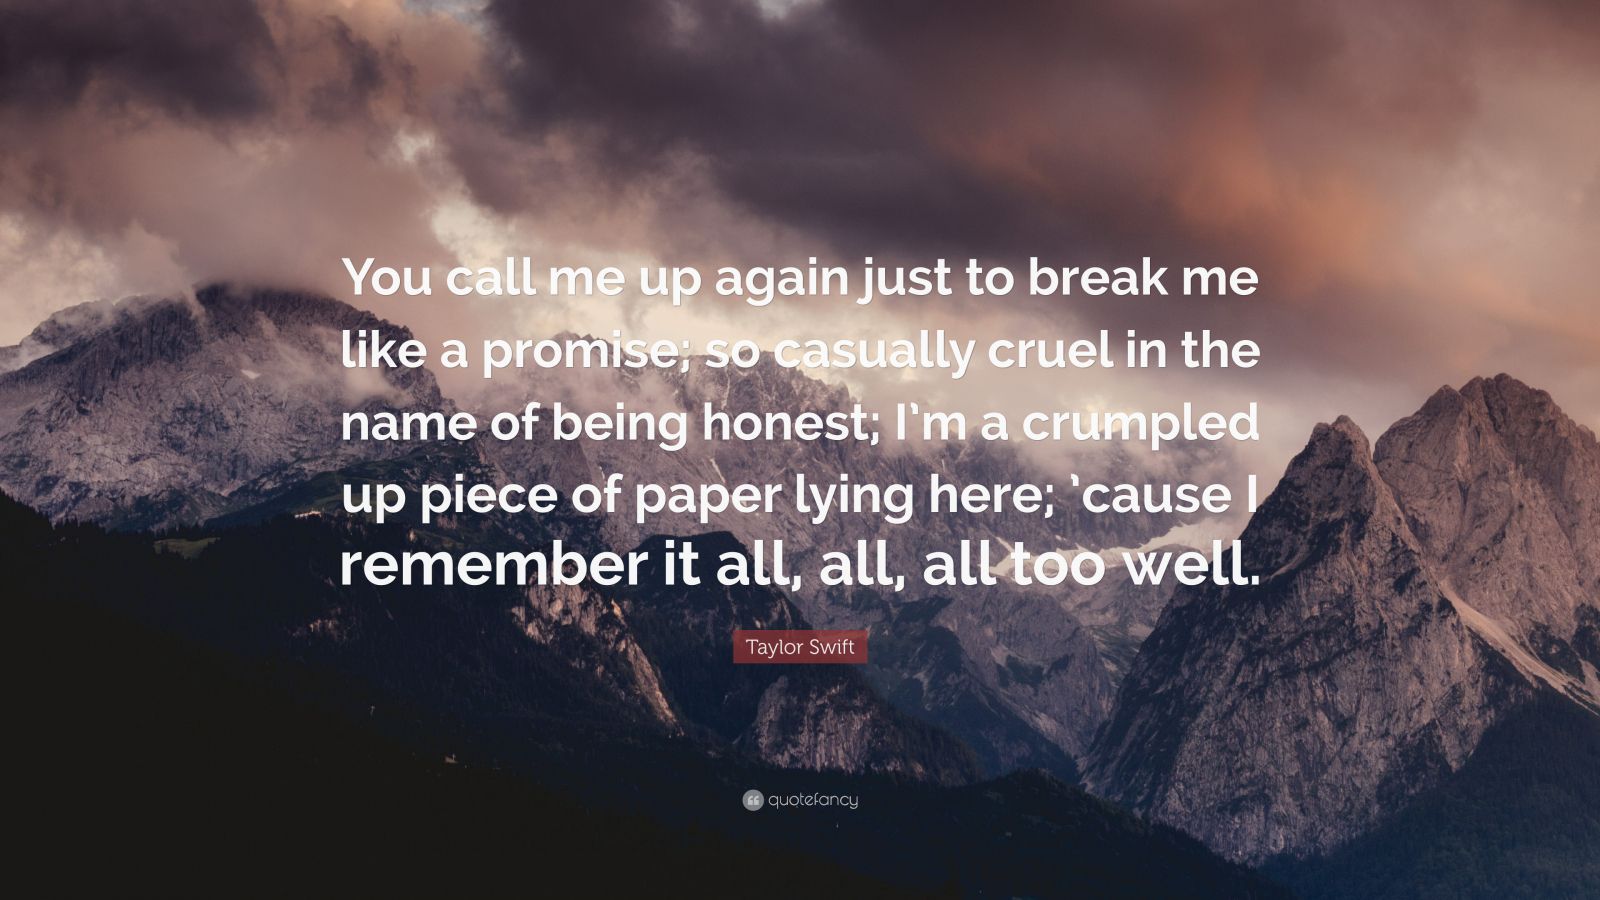 Taylor Swift Quote: “You call me up again just to break me like a promise;  so casually cruel in the name of being honest; I'm a crumpled up p”